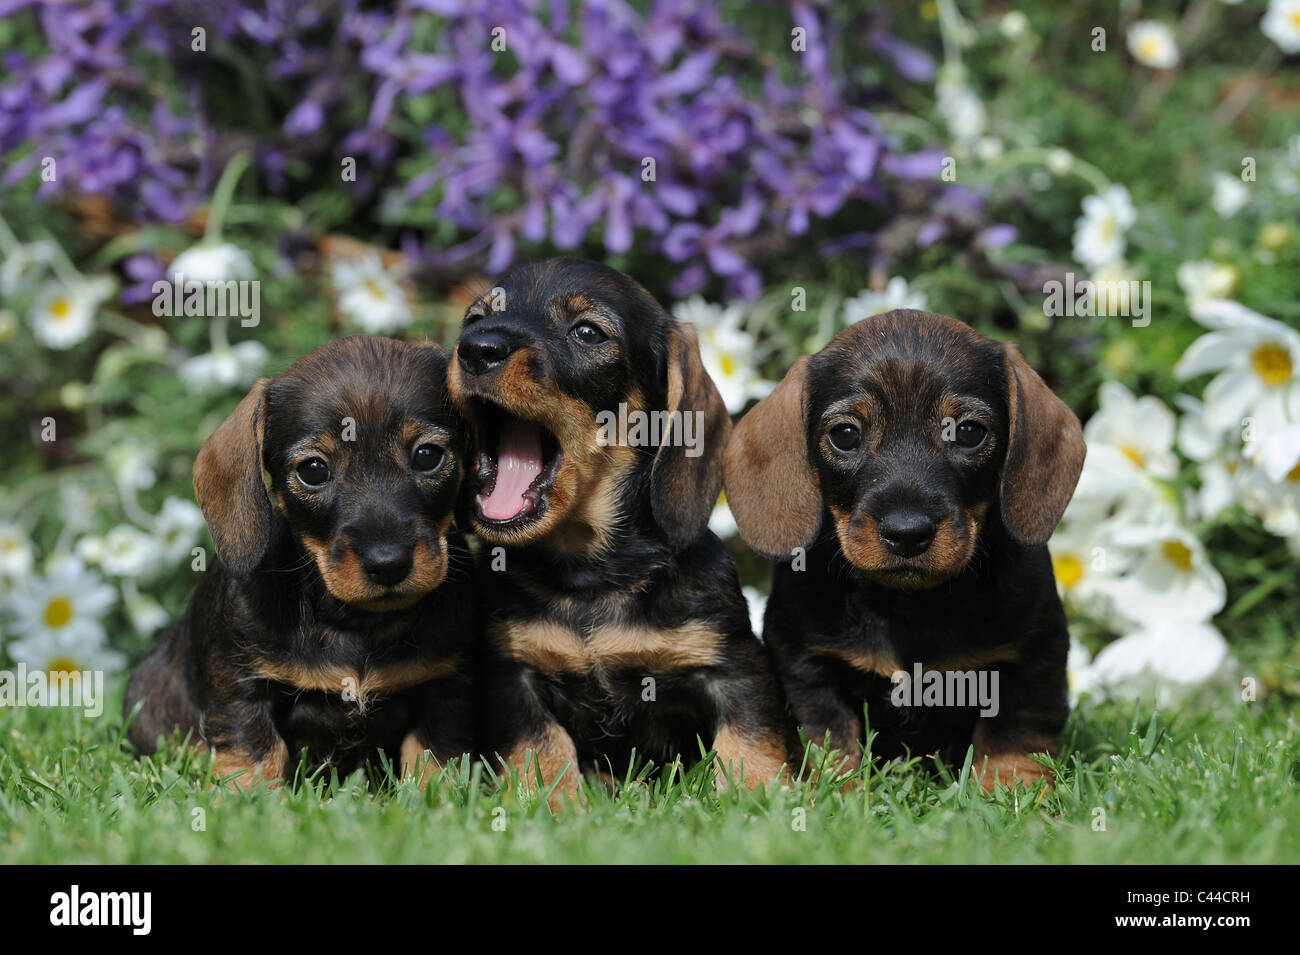 Wire-haired Dachshund (Canis lupus familiaris). Three puppies in a flowering garden in spring. Stock Photo